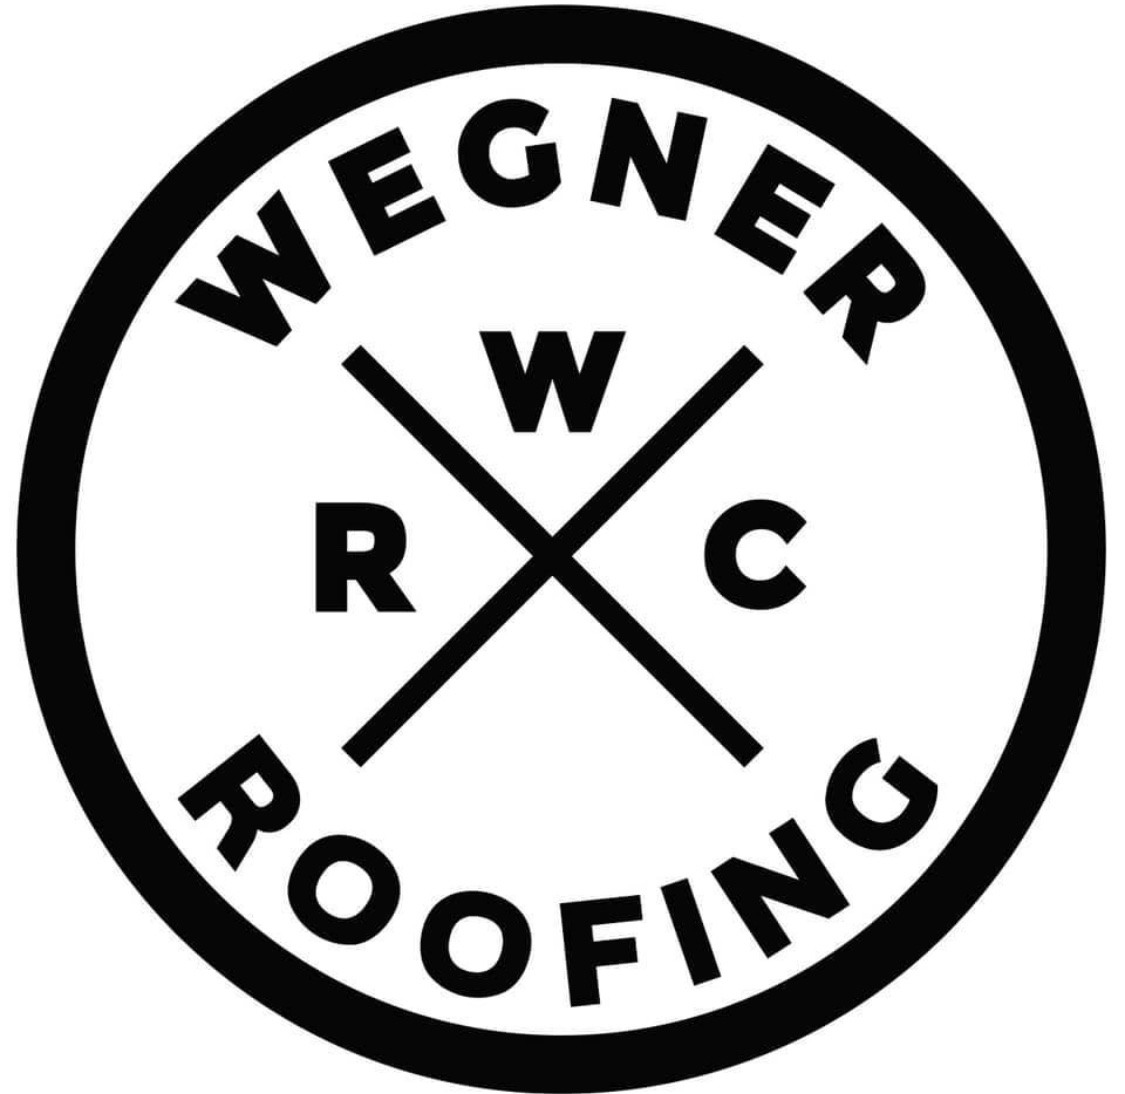 Wegner Roofing & Solar highlighted that they are the highest-rated roofers in Montana, North Dakota & South Dakota. 